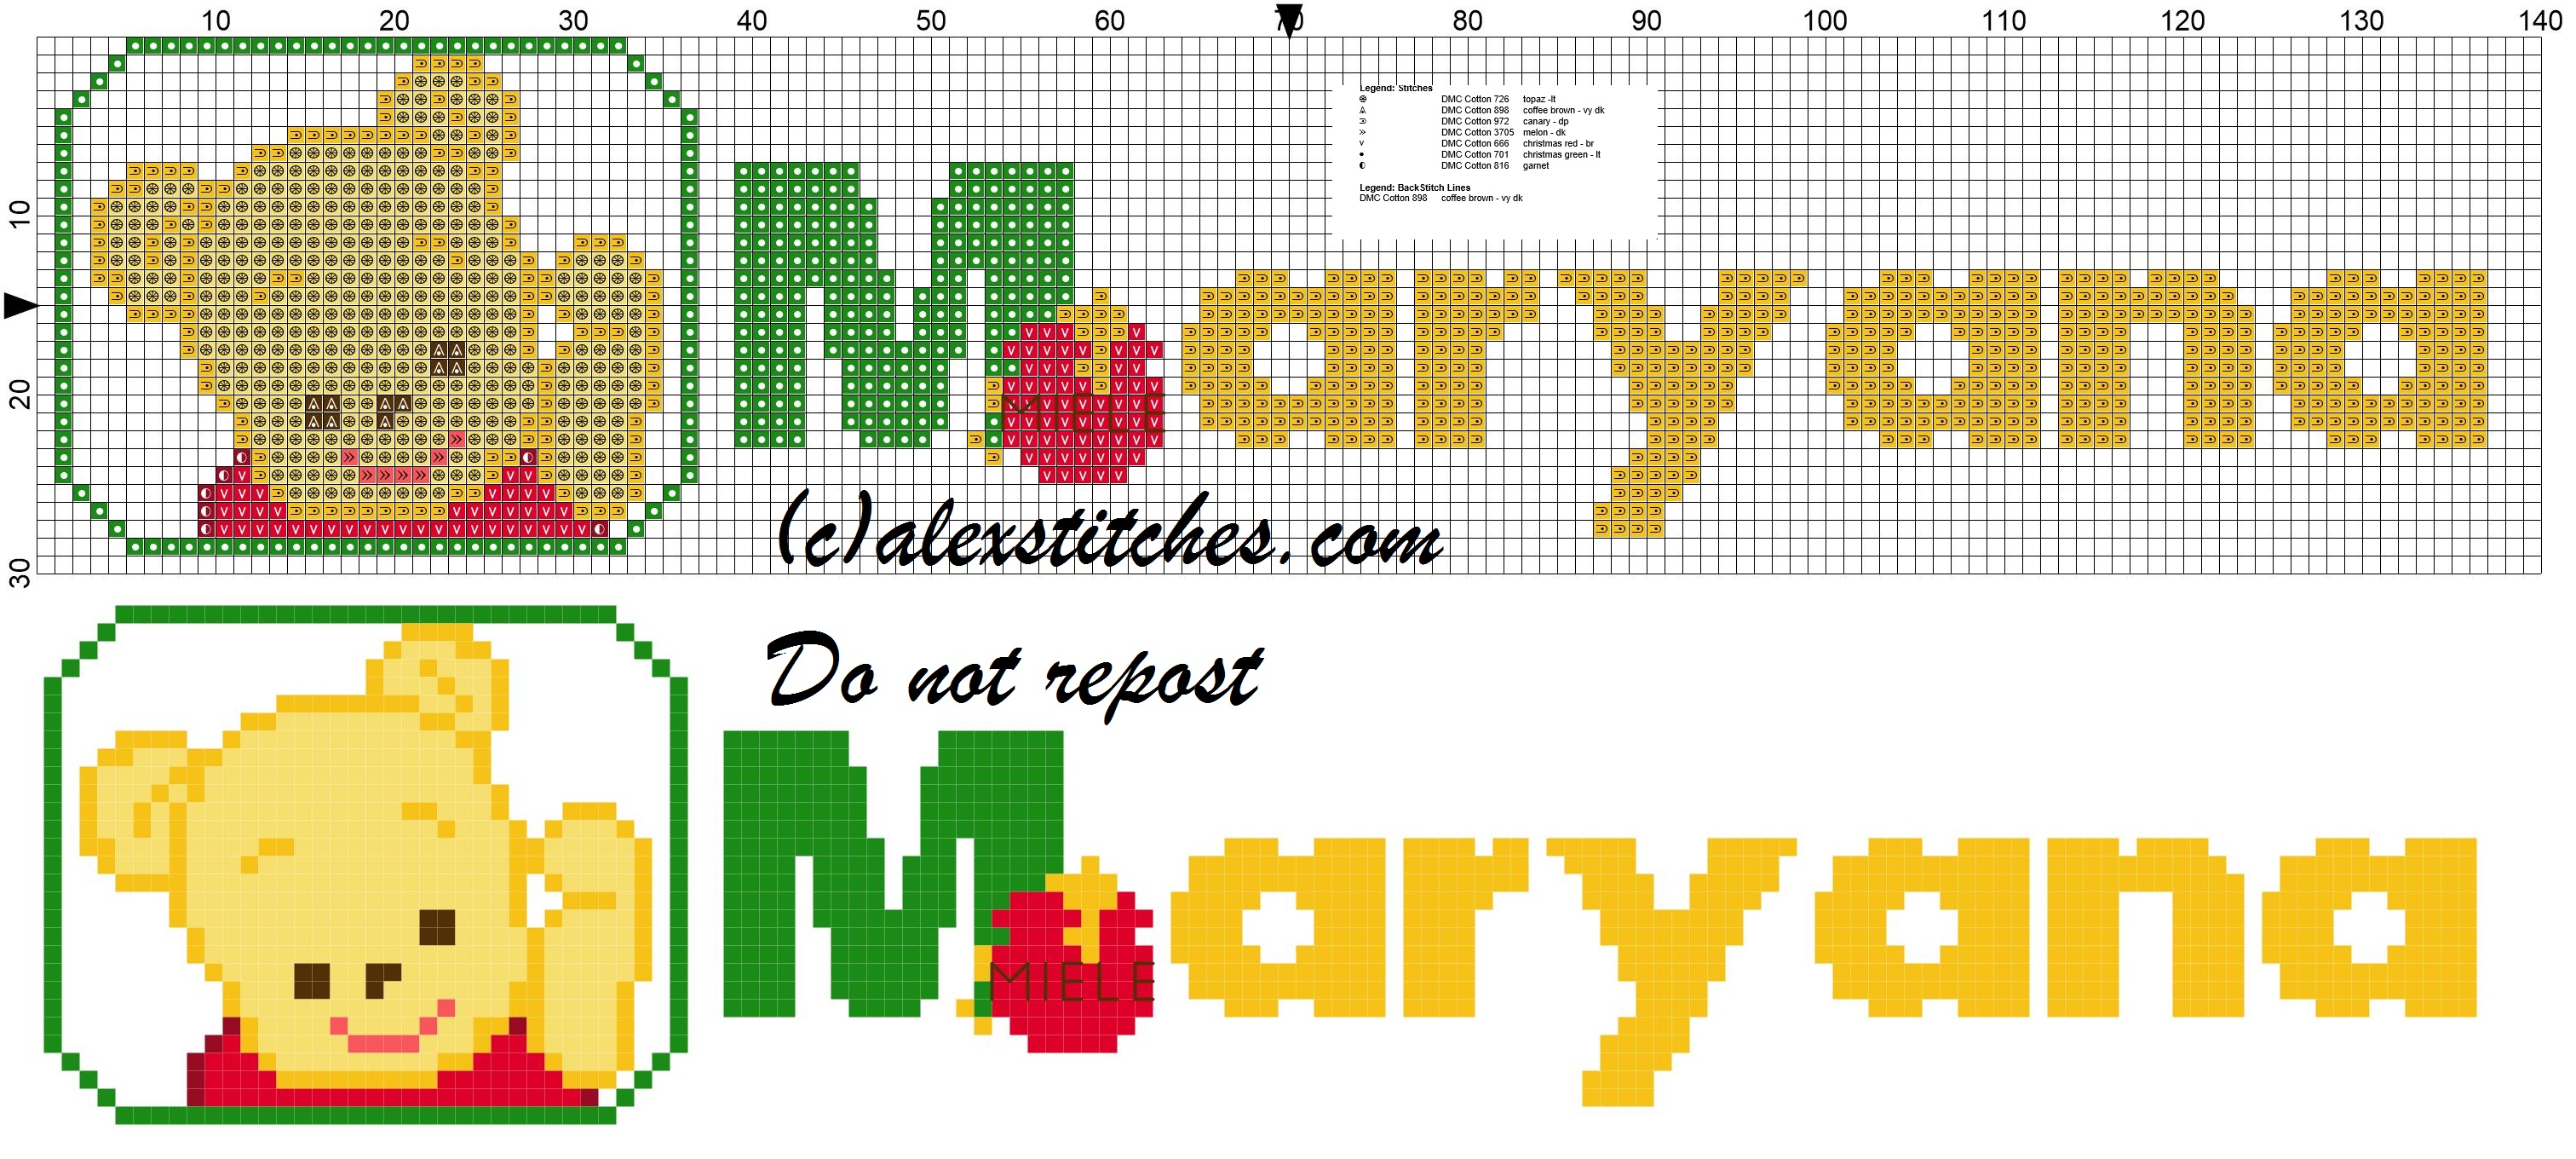 Maryana name with Baby winnie the pooh free cross stitches pattern